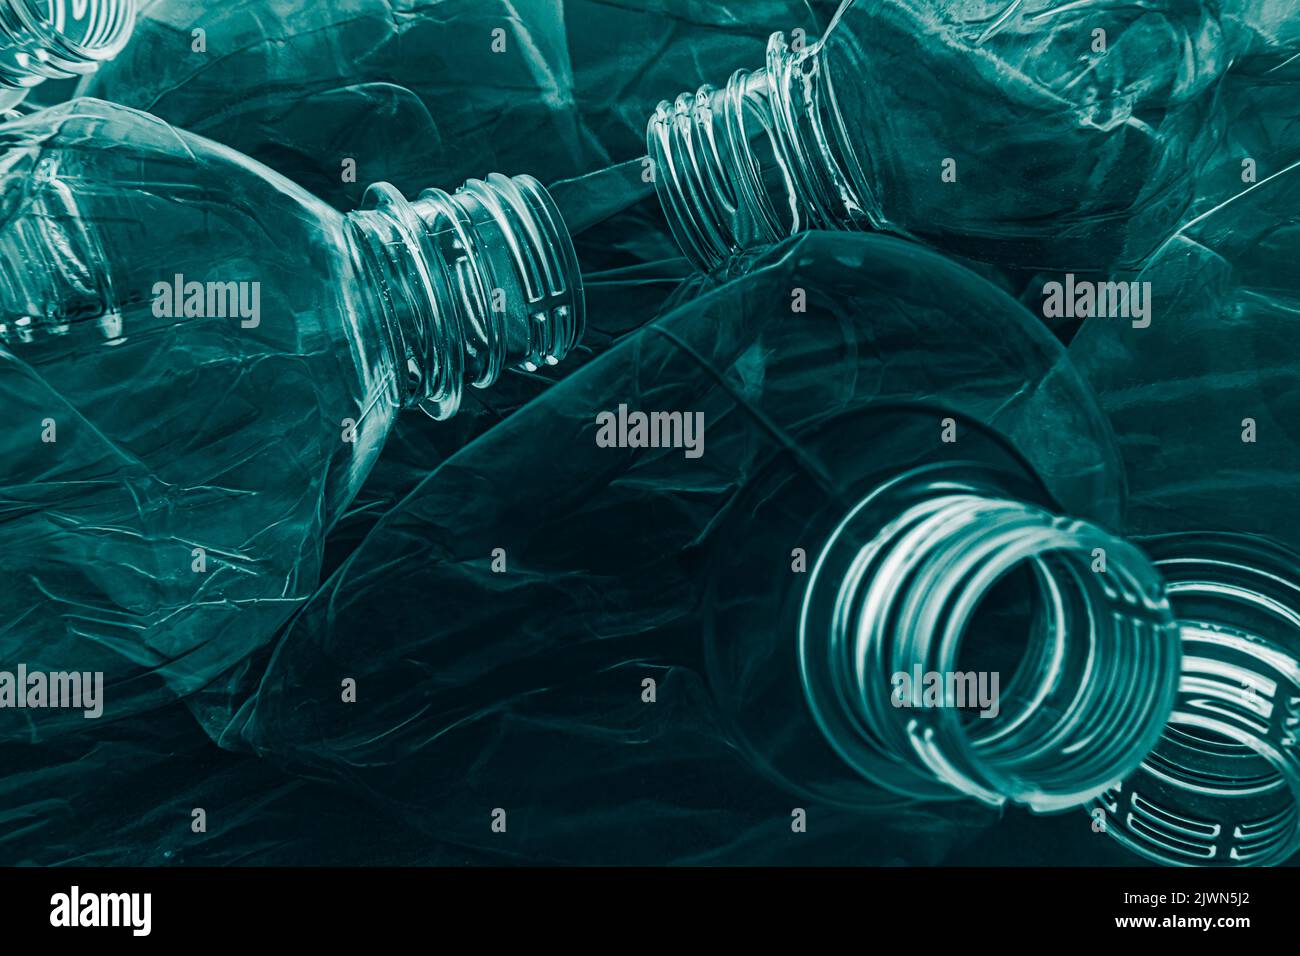 marine pollution plastic recycling bottles teal Stock Photo